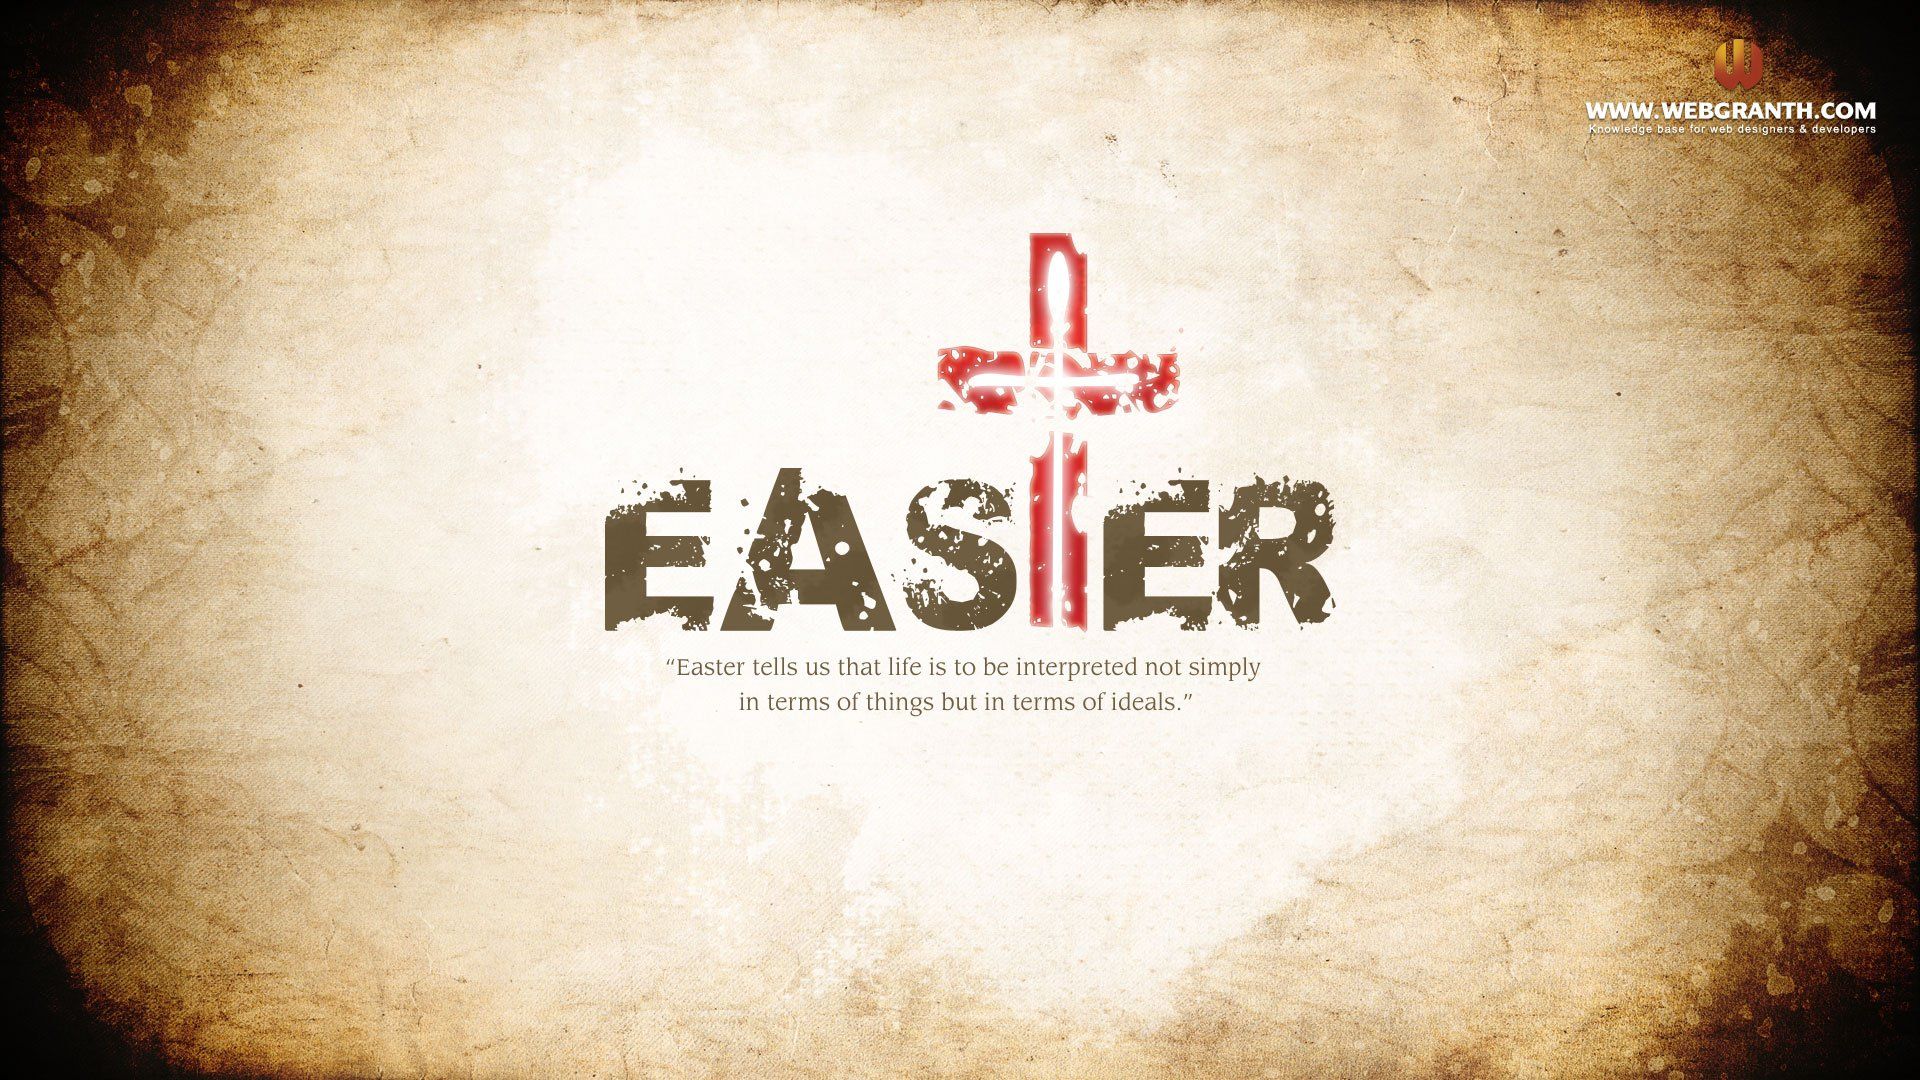 Easter quotes christian for facebook timeline Facebook timeline graphics l facebook covers l free christian